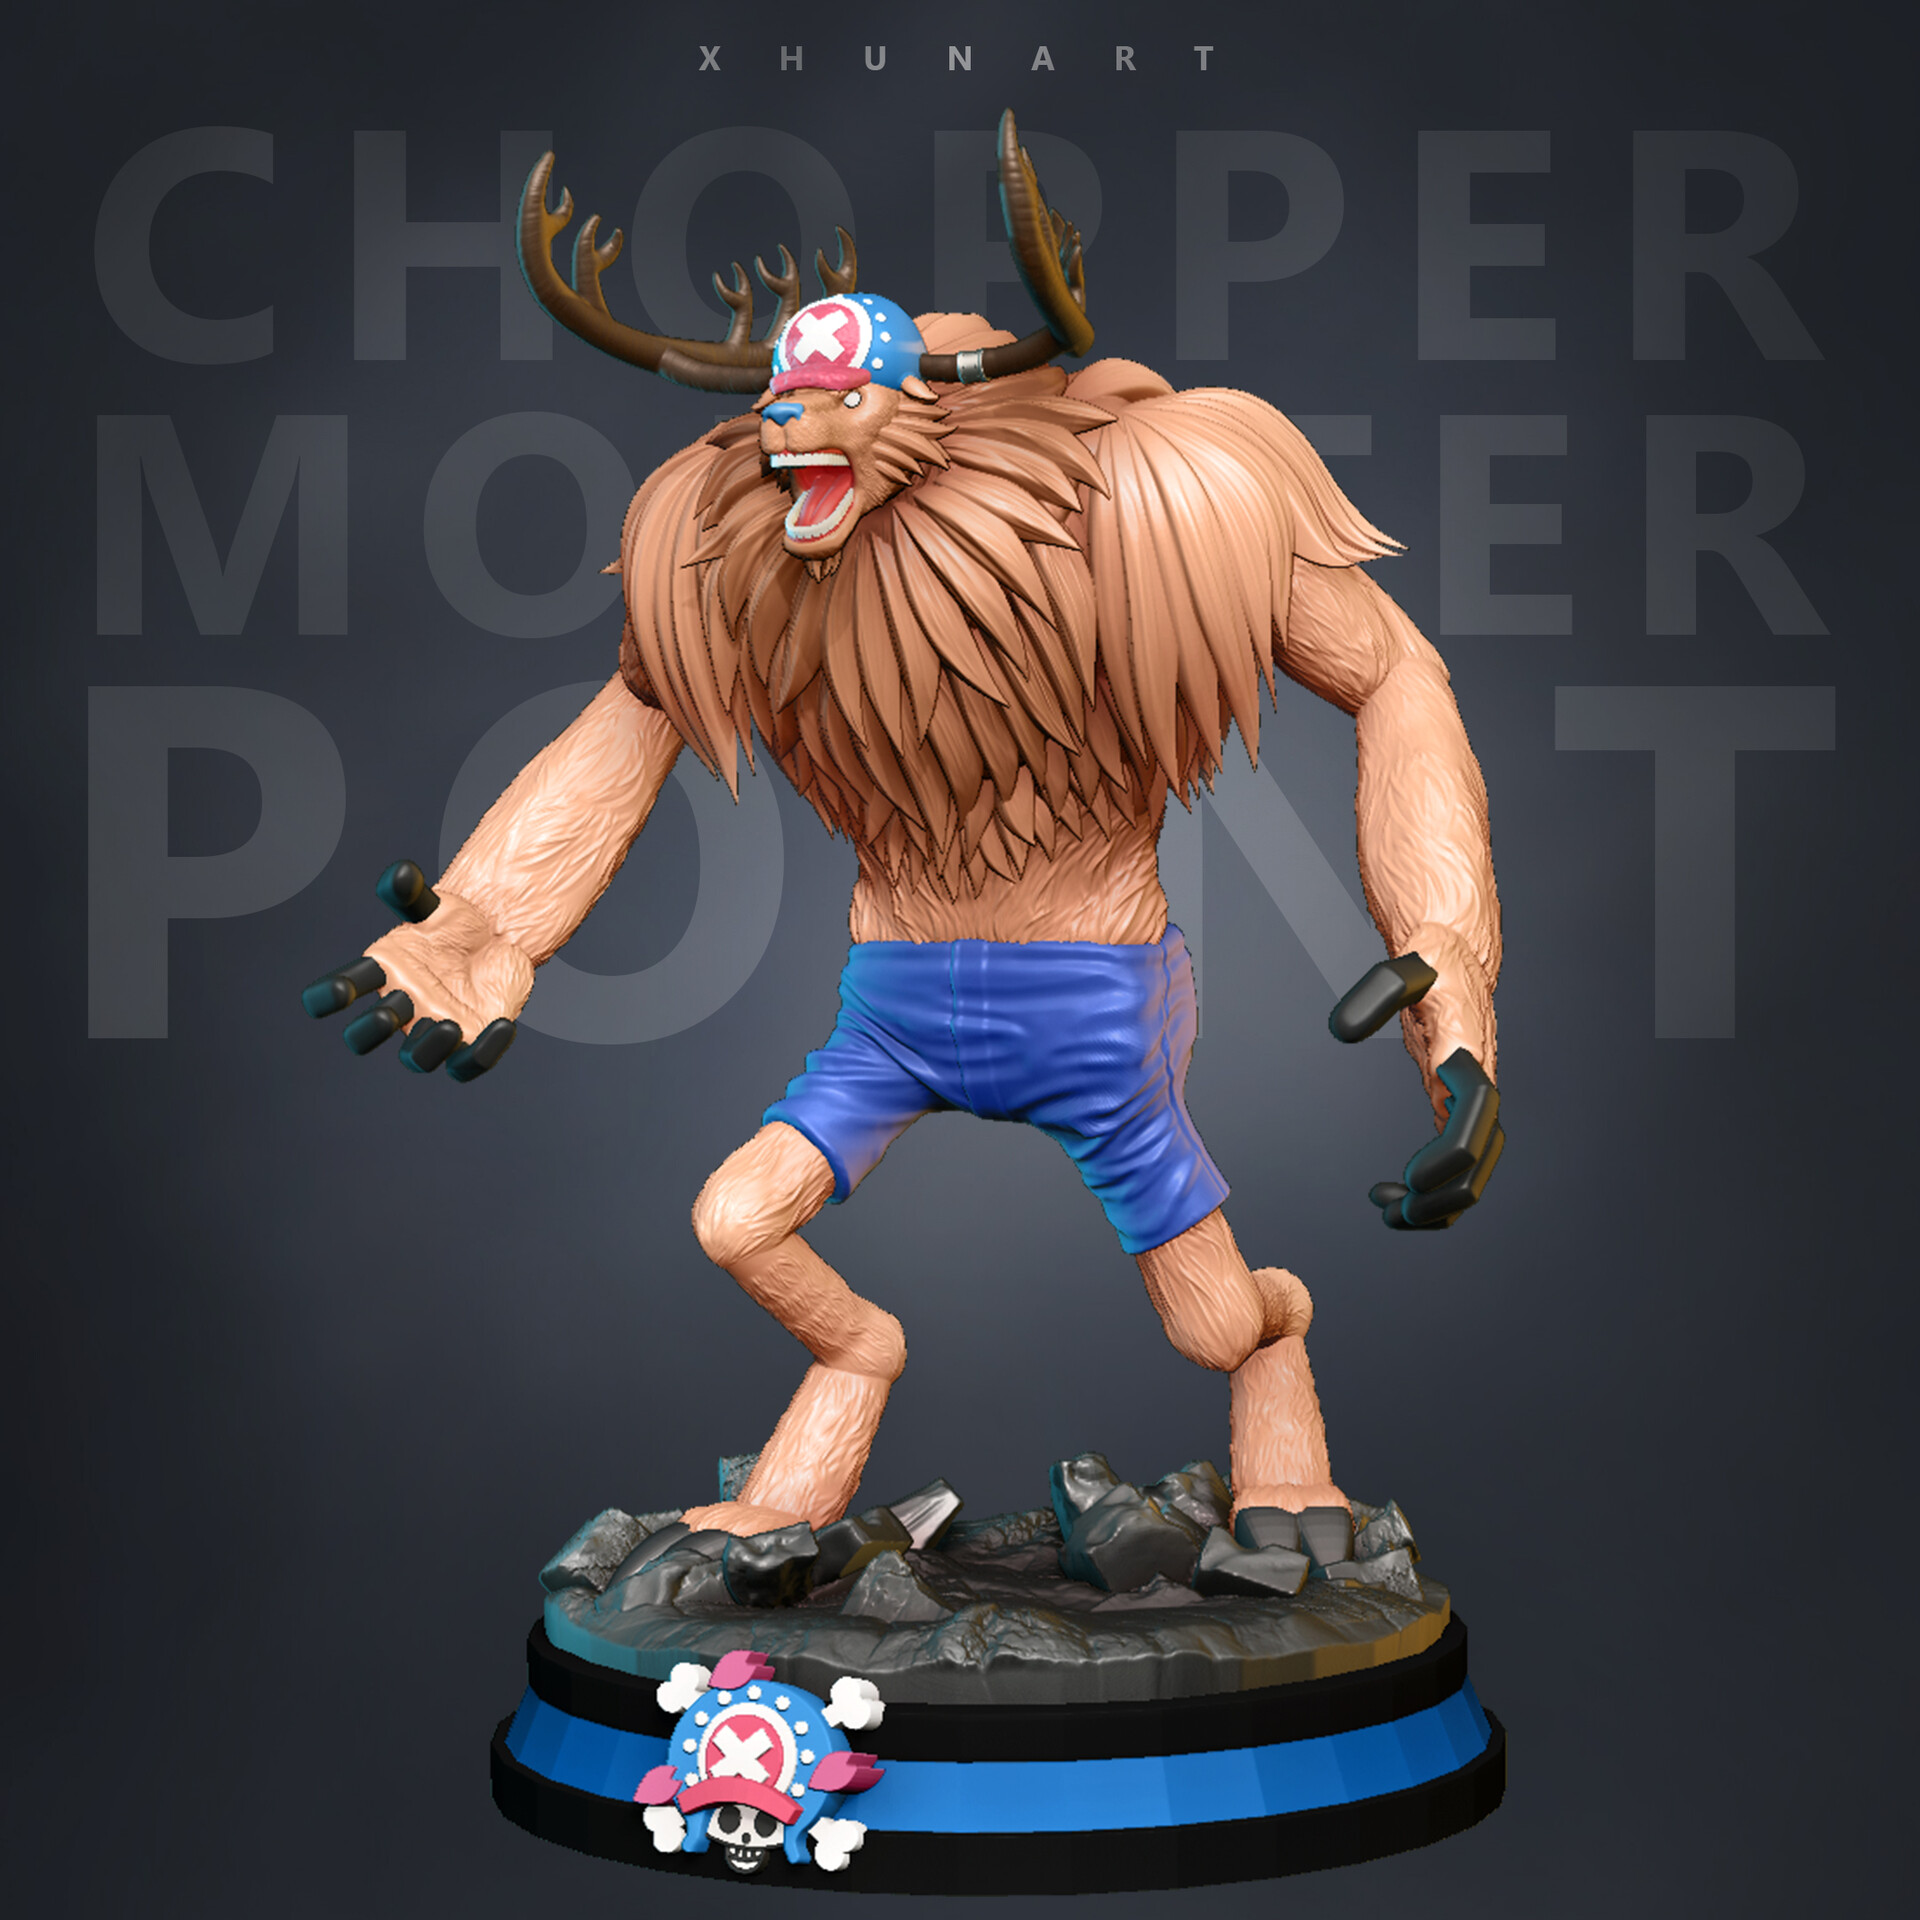 XhunArt - Here's our Chopper monster point final output